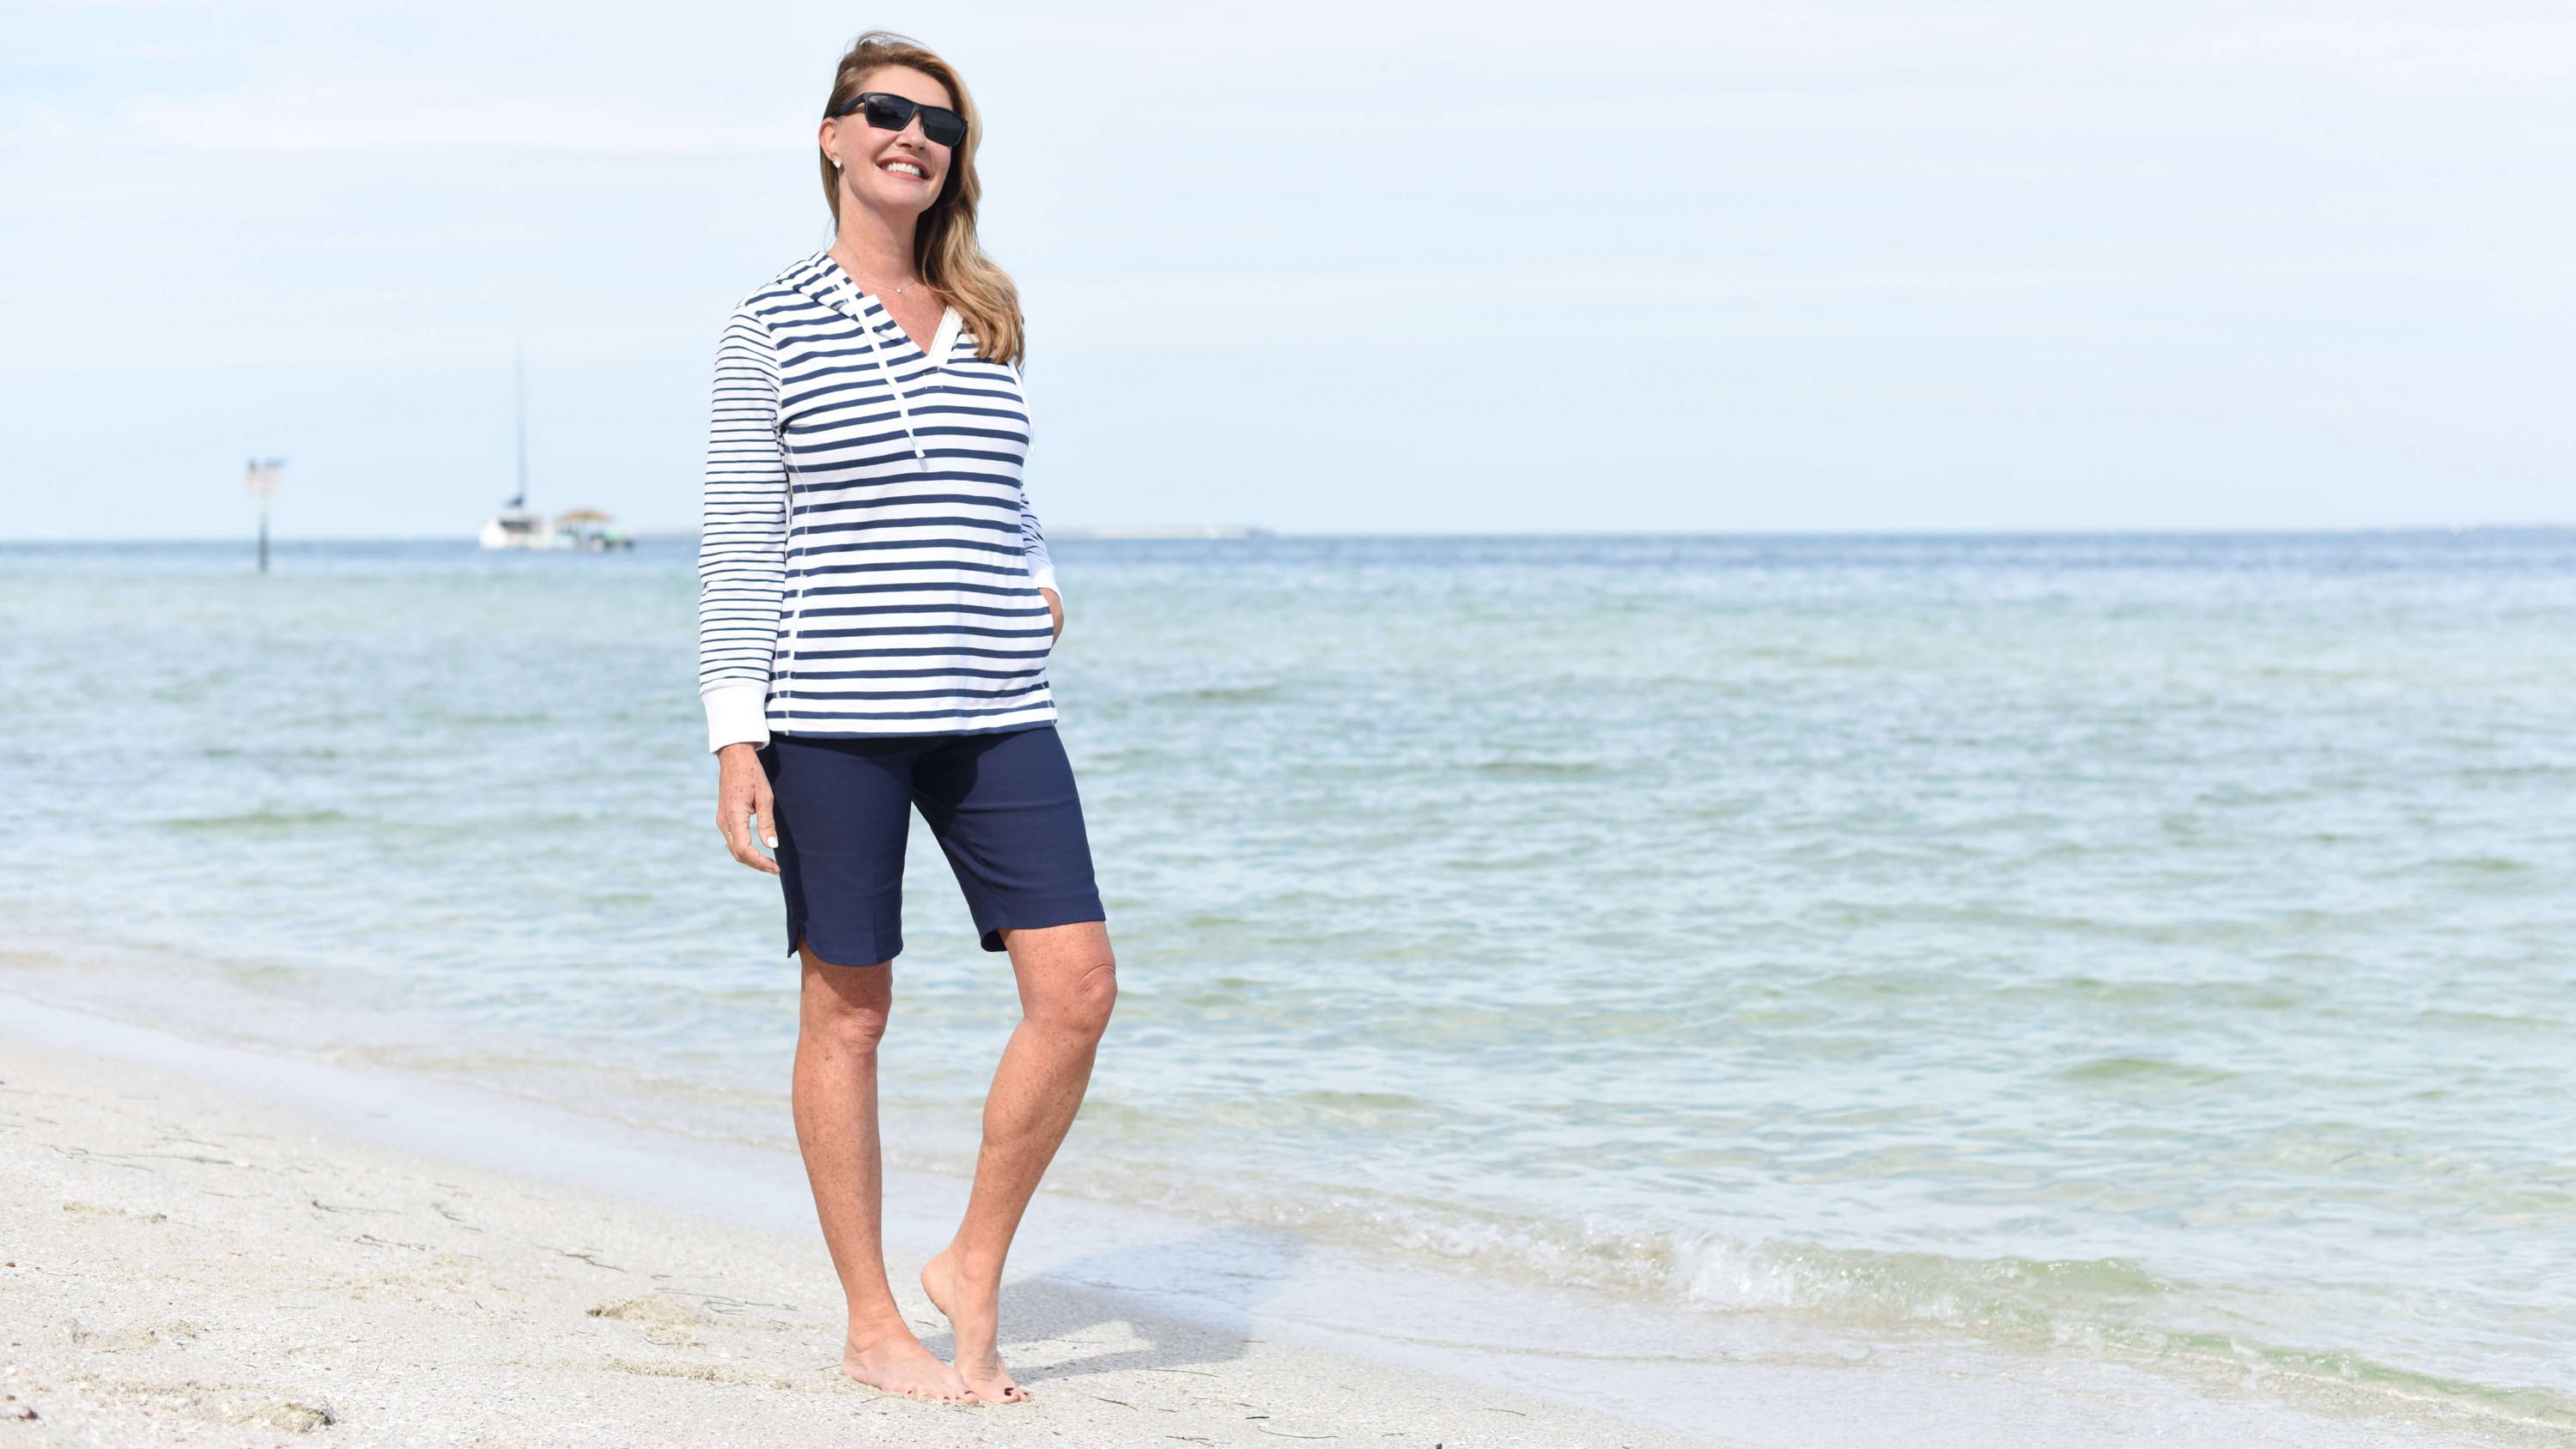 A smiling blonde woman wearing sunglasses, a striped hoodie, and bermuda shorts stands on a beach.